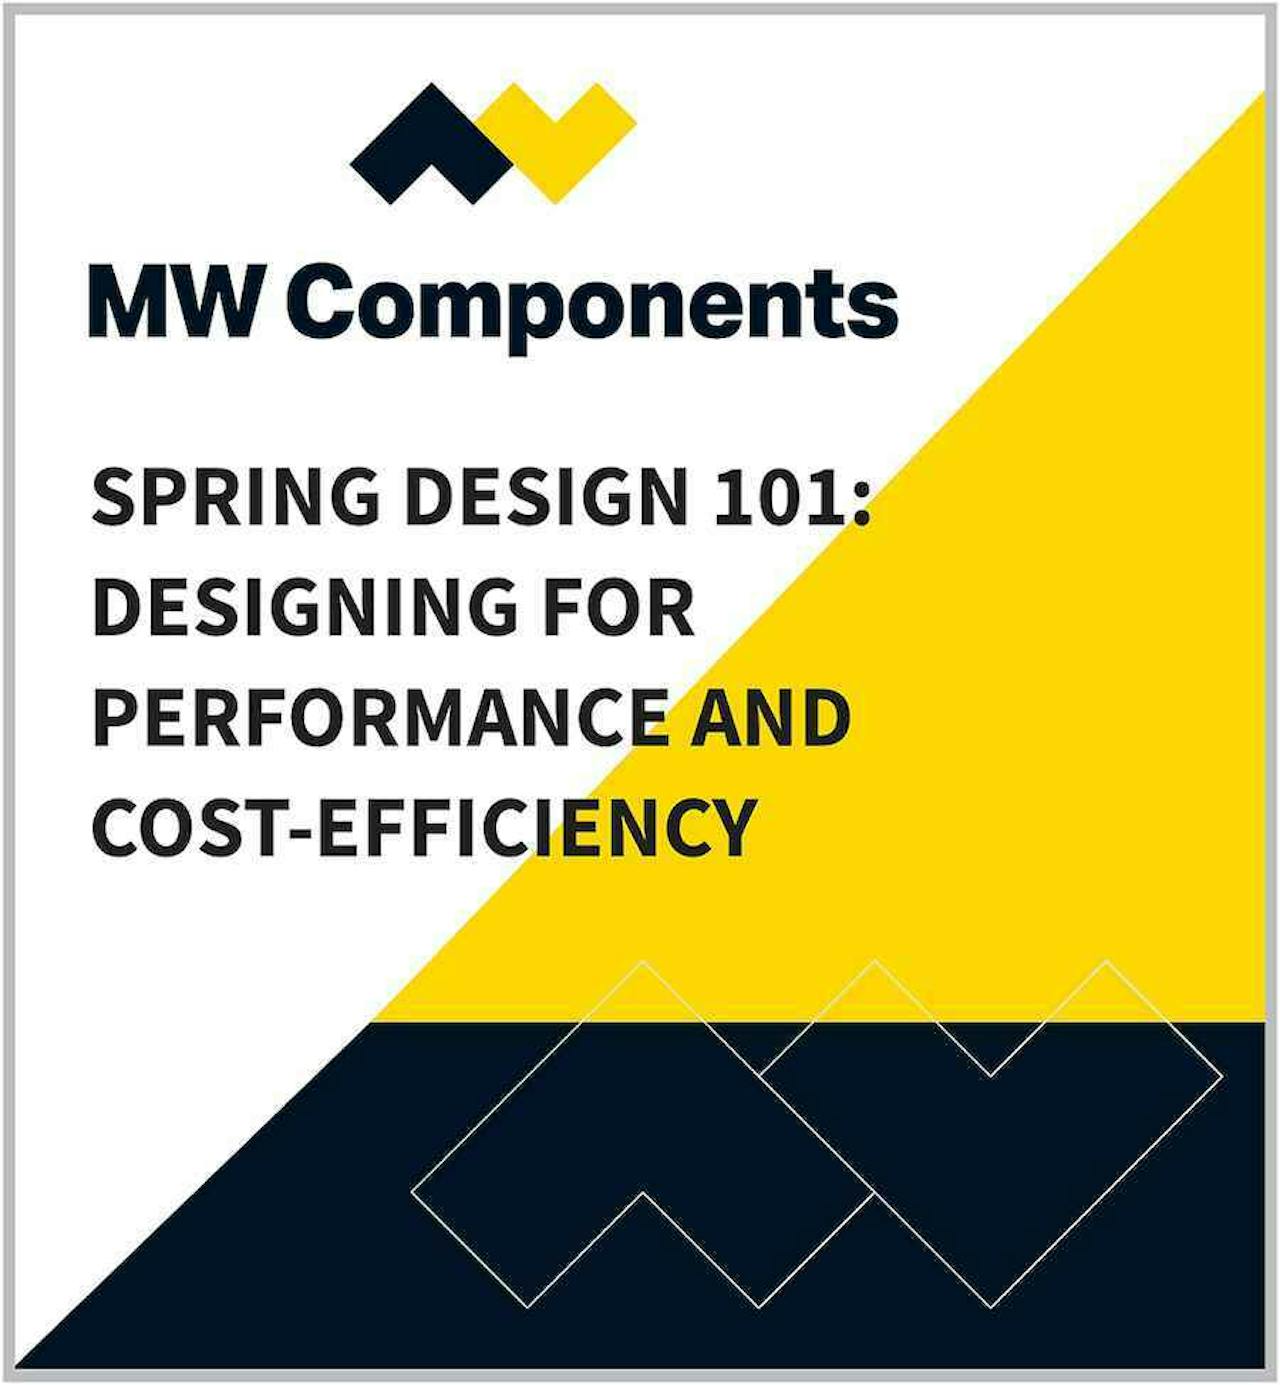 MWC Spring Design 101 Designing for Performance and Cost Efficiency